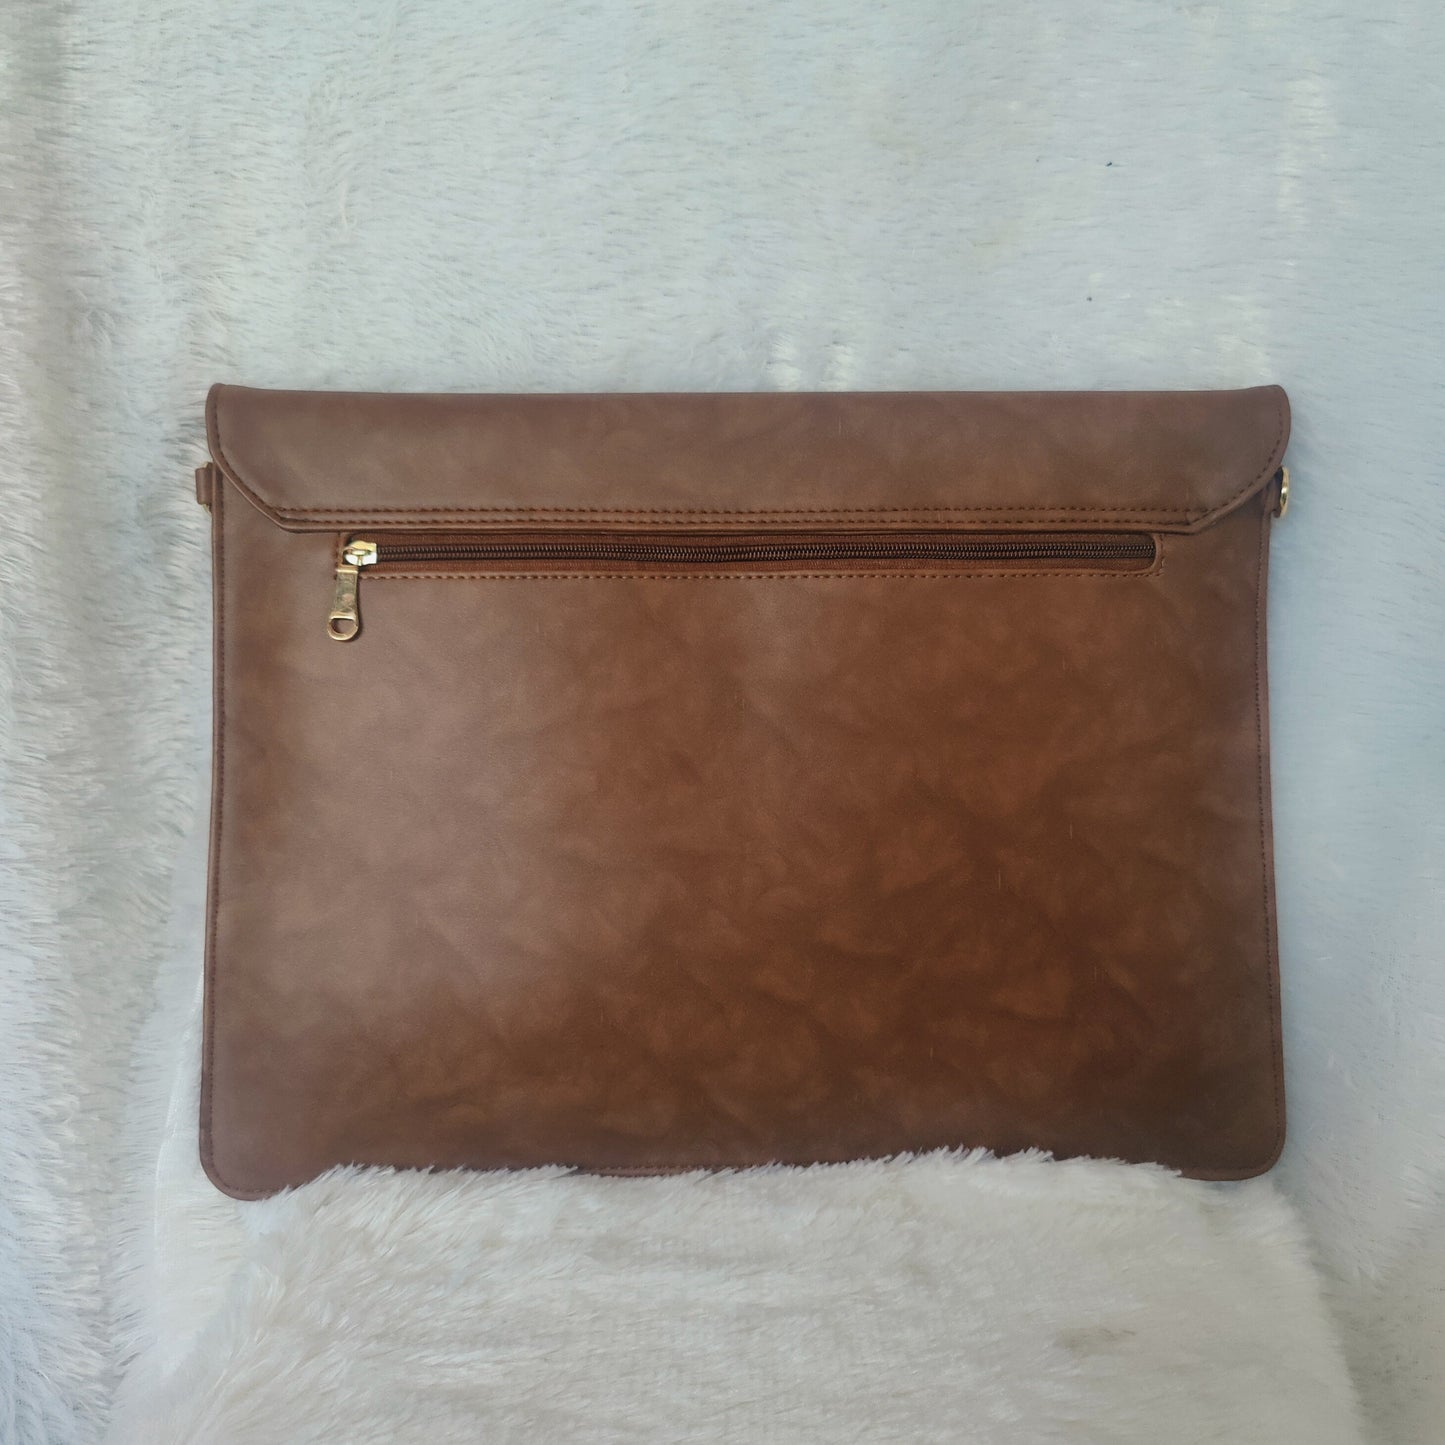 Quirky Handcrafted Laptop Bag with Belt